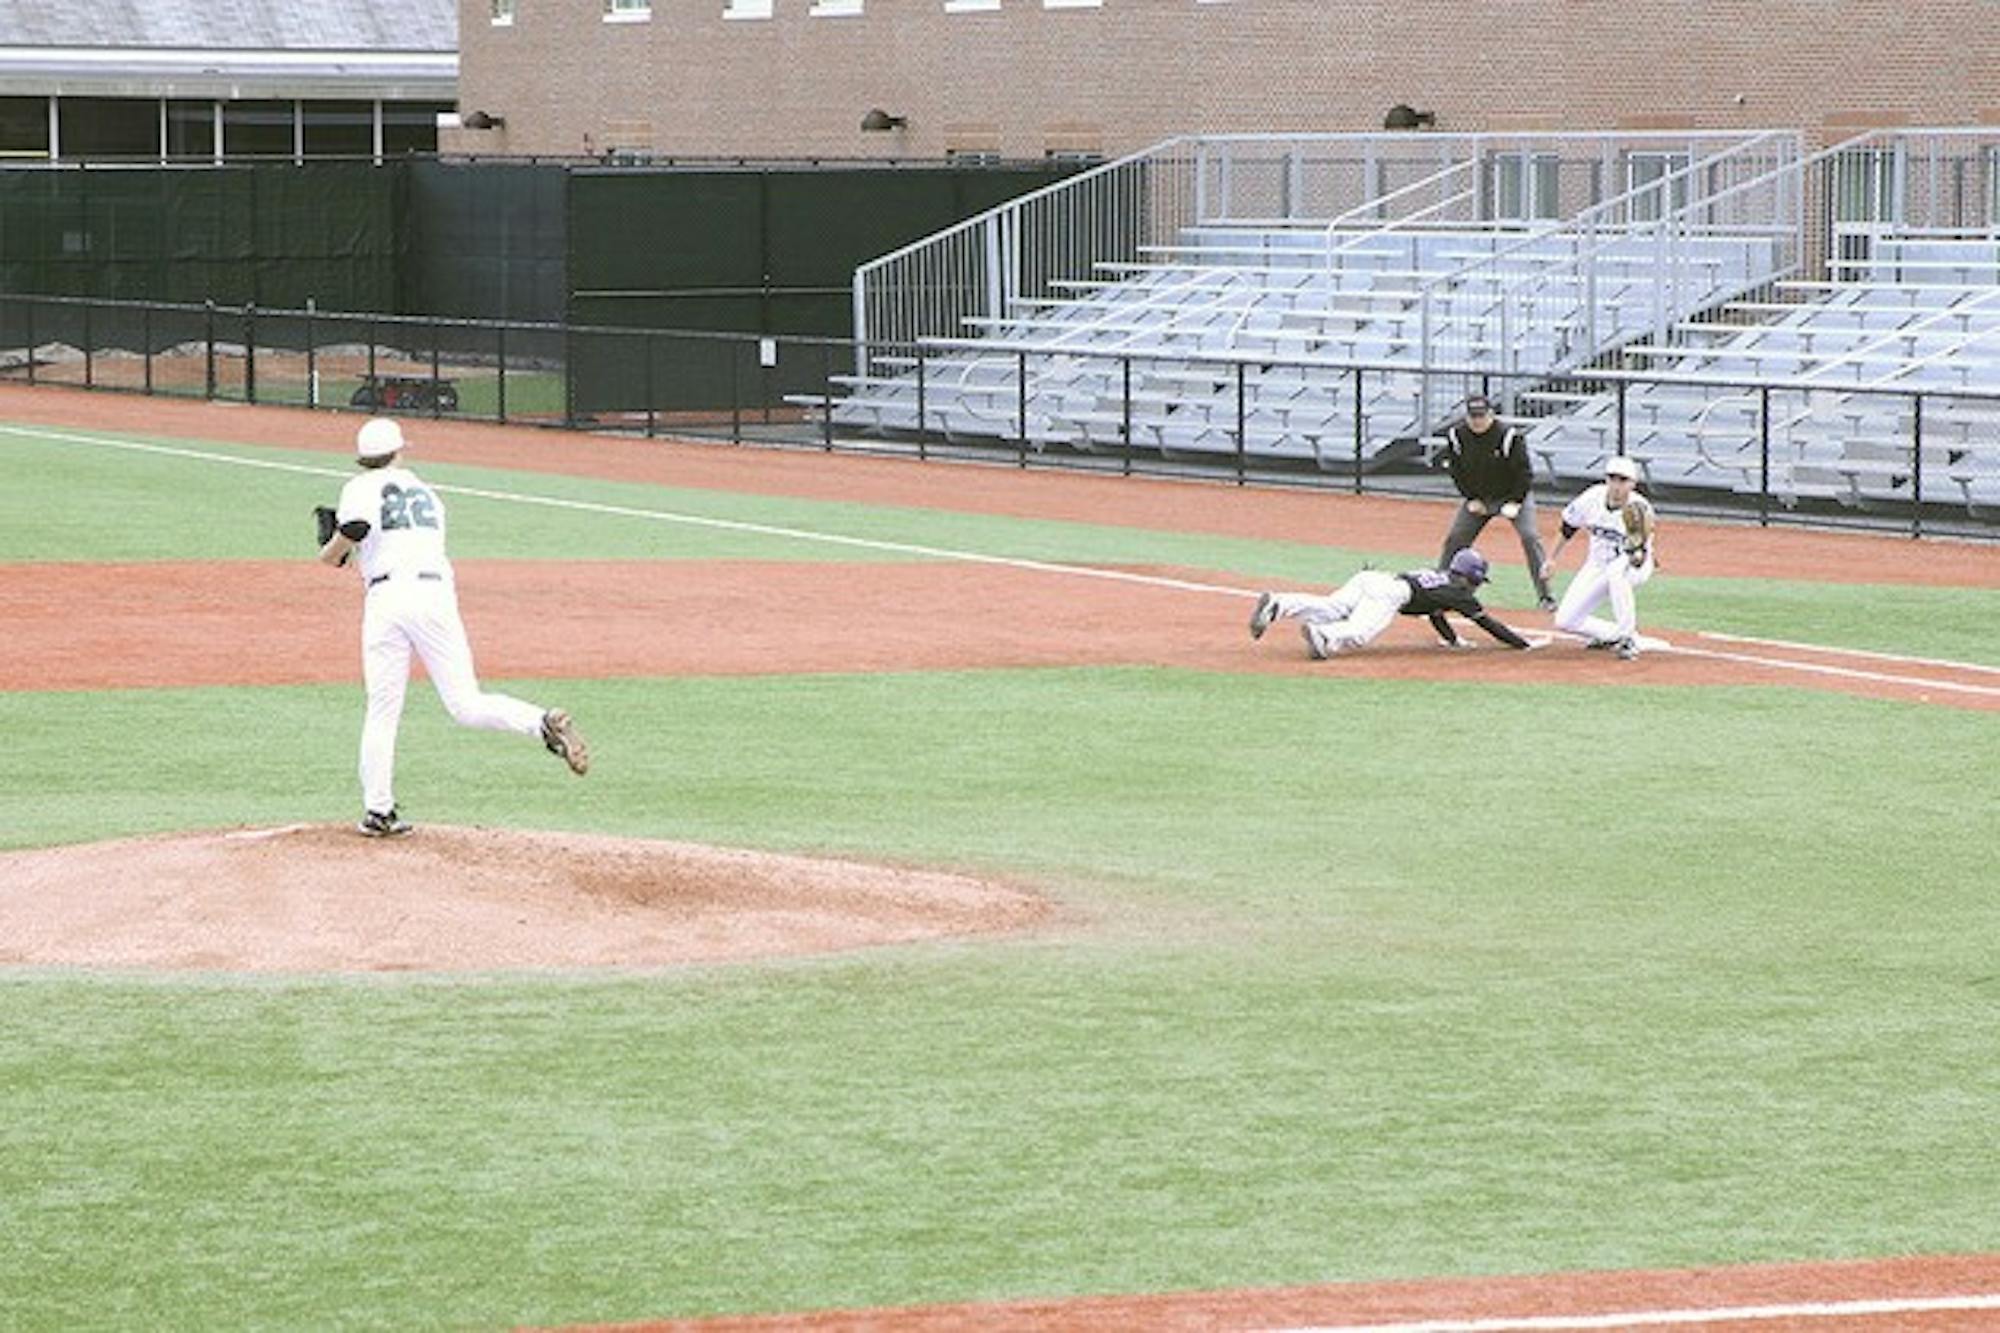 The Dartmouth baseball team will open a four-game series at home against Yale University on Saturday.